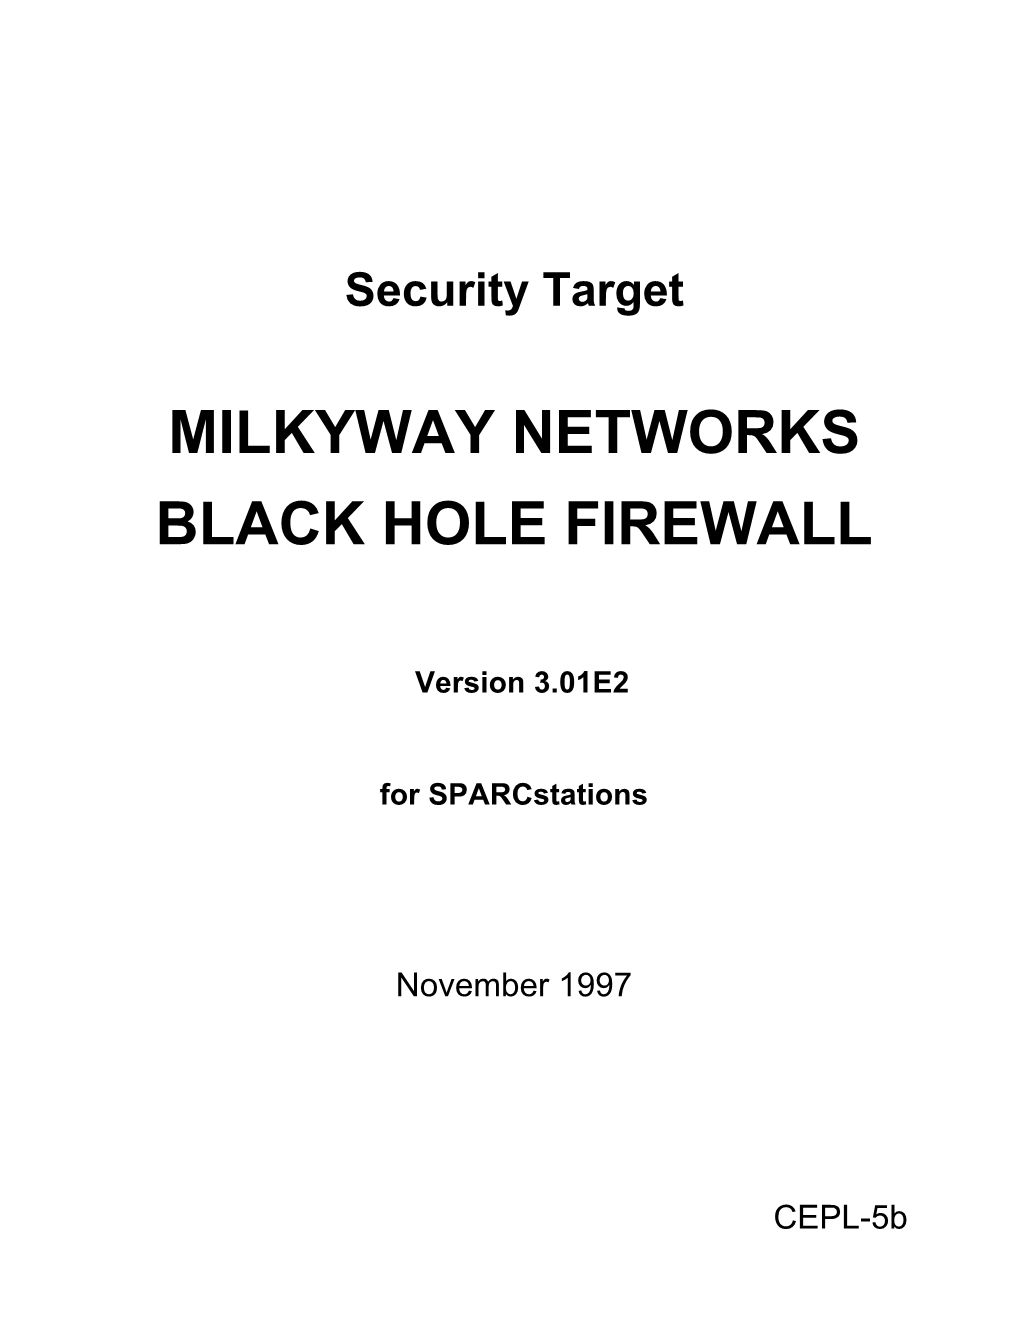 Milkyway Networks Black Hole Firewall Version 3.01E2, Against the Requirements Specified by the Common Criteria for Information Technology Security Evaluation [COM96]